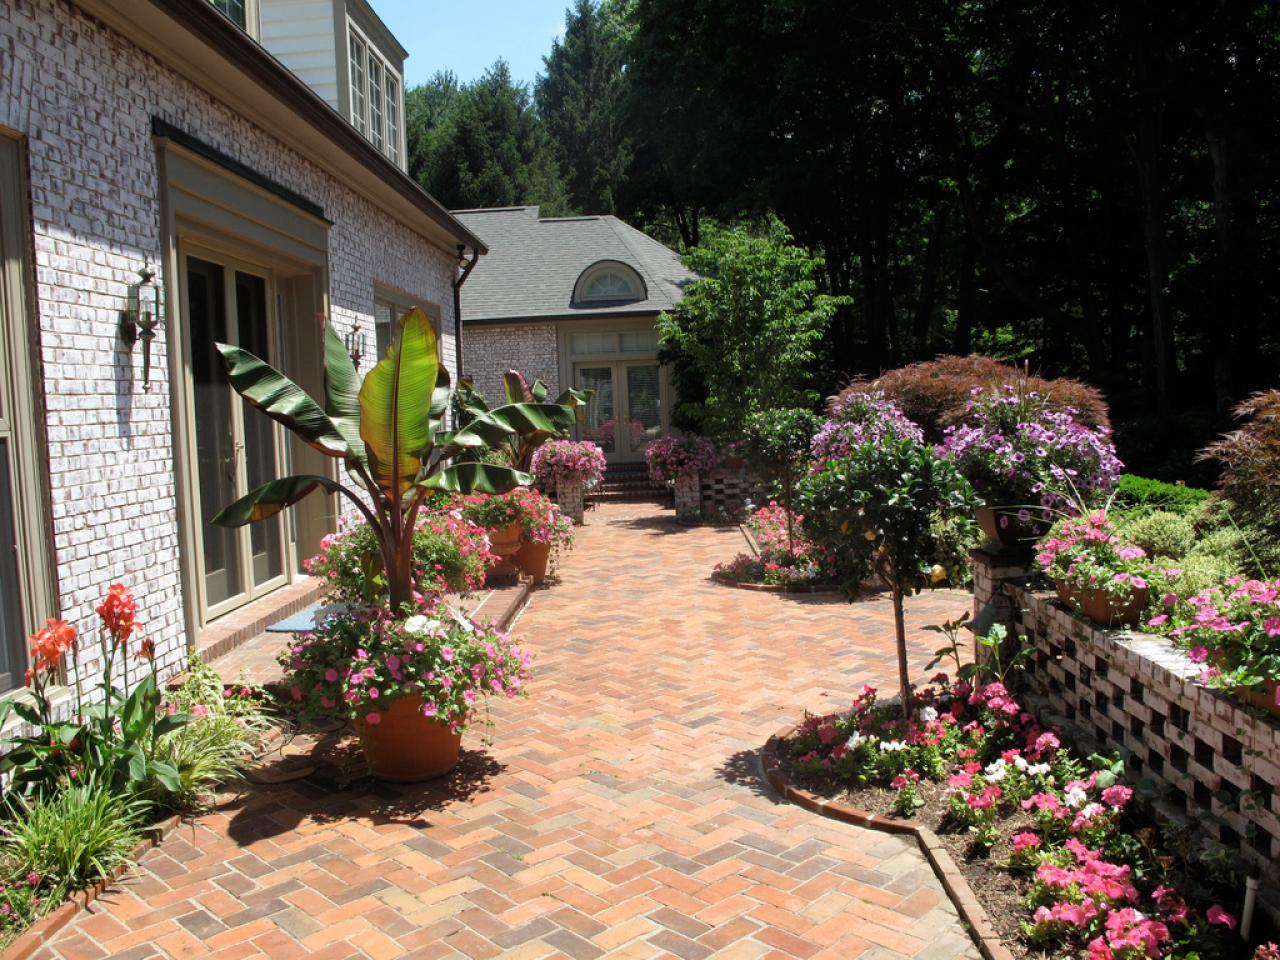 Cheap Patio Paver Ideas | Examples and Forms